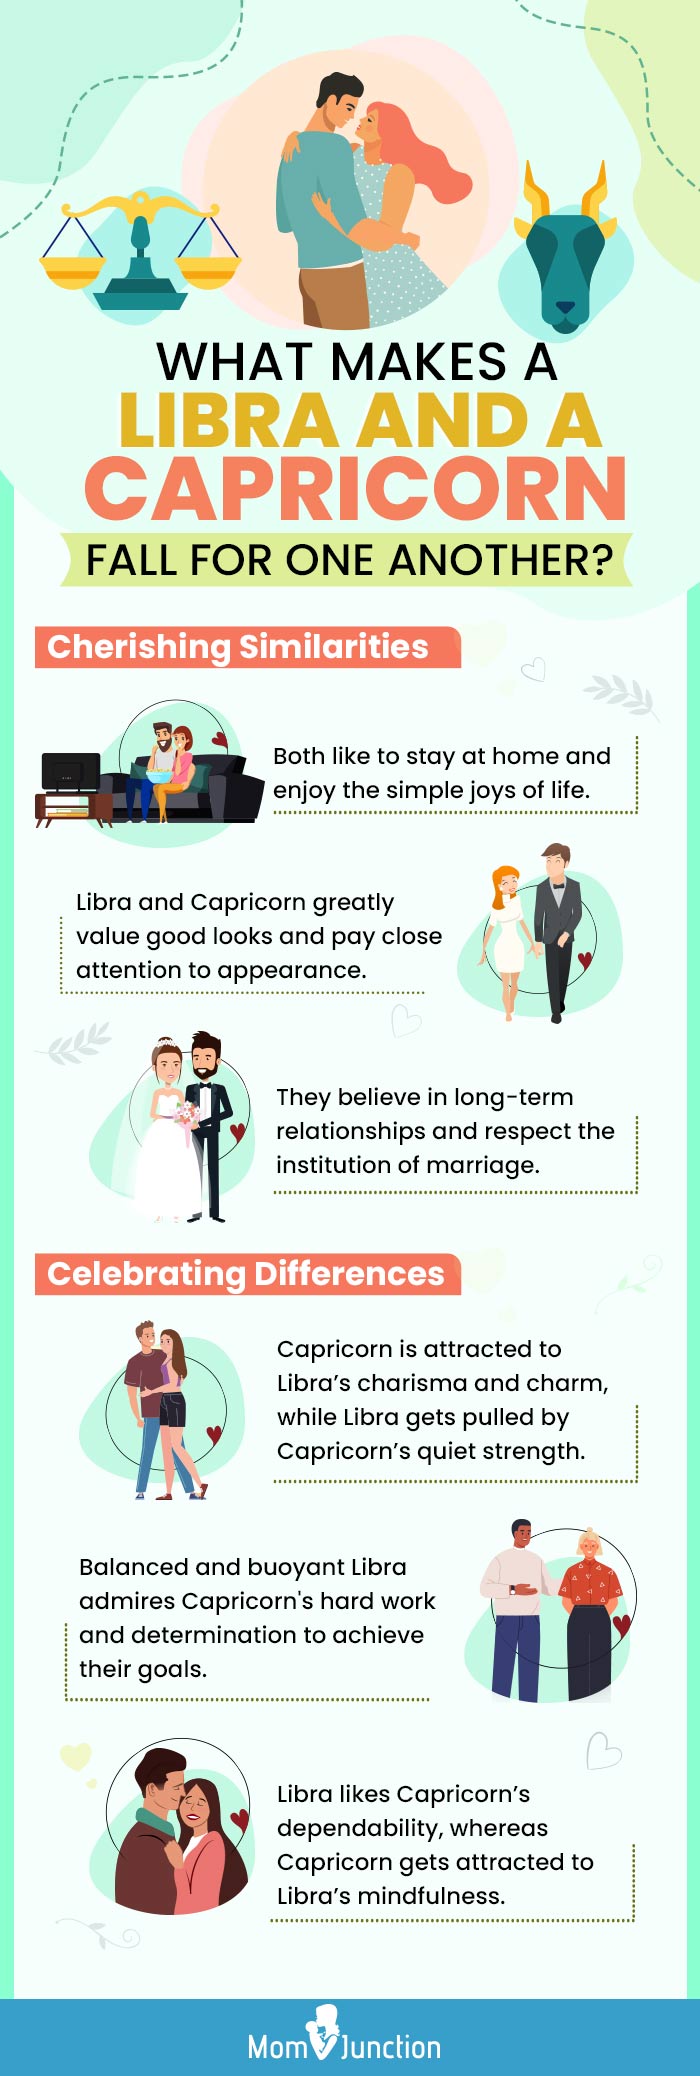 what makes a libra and a capricorn fall for one another (infographic)